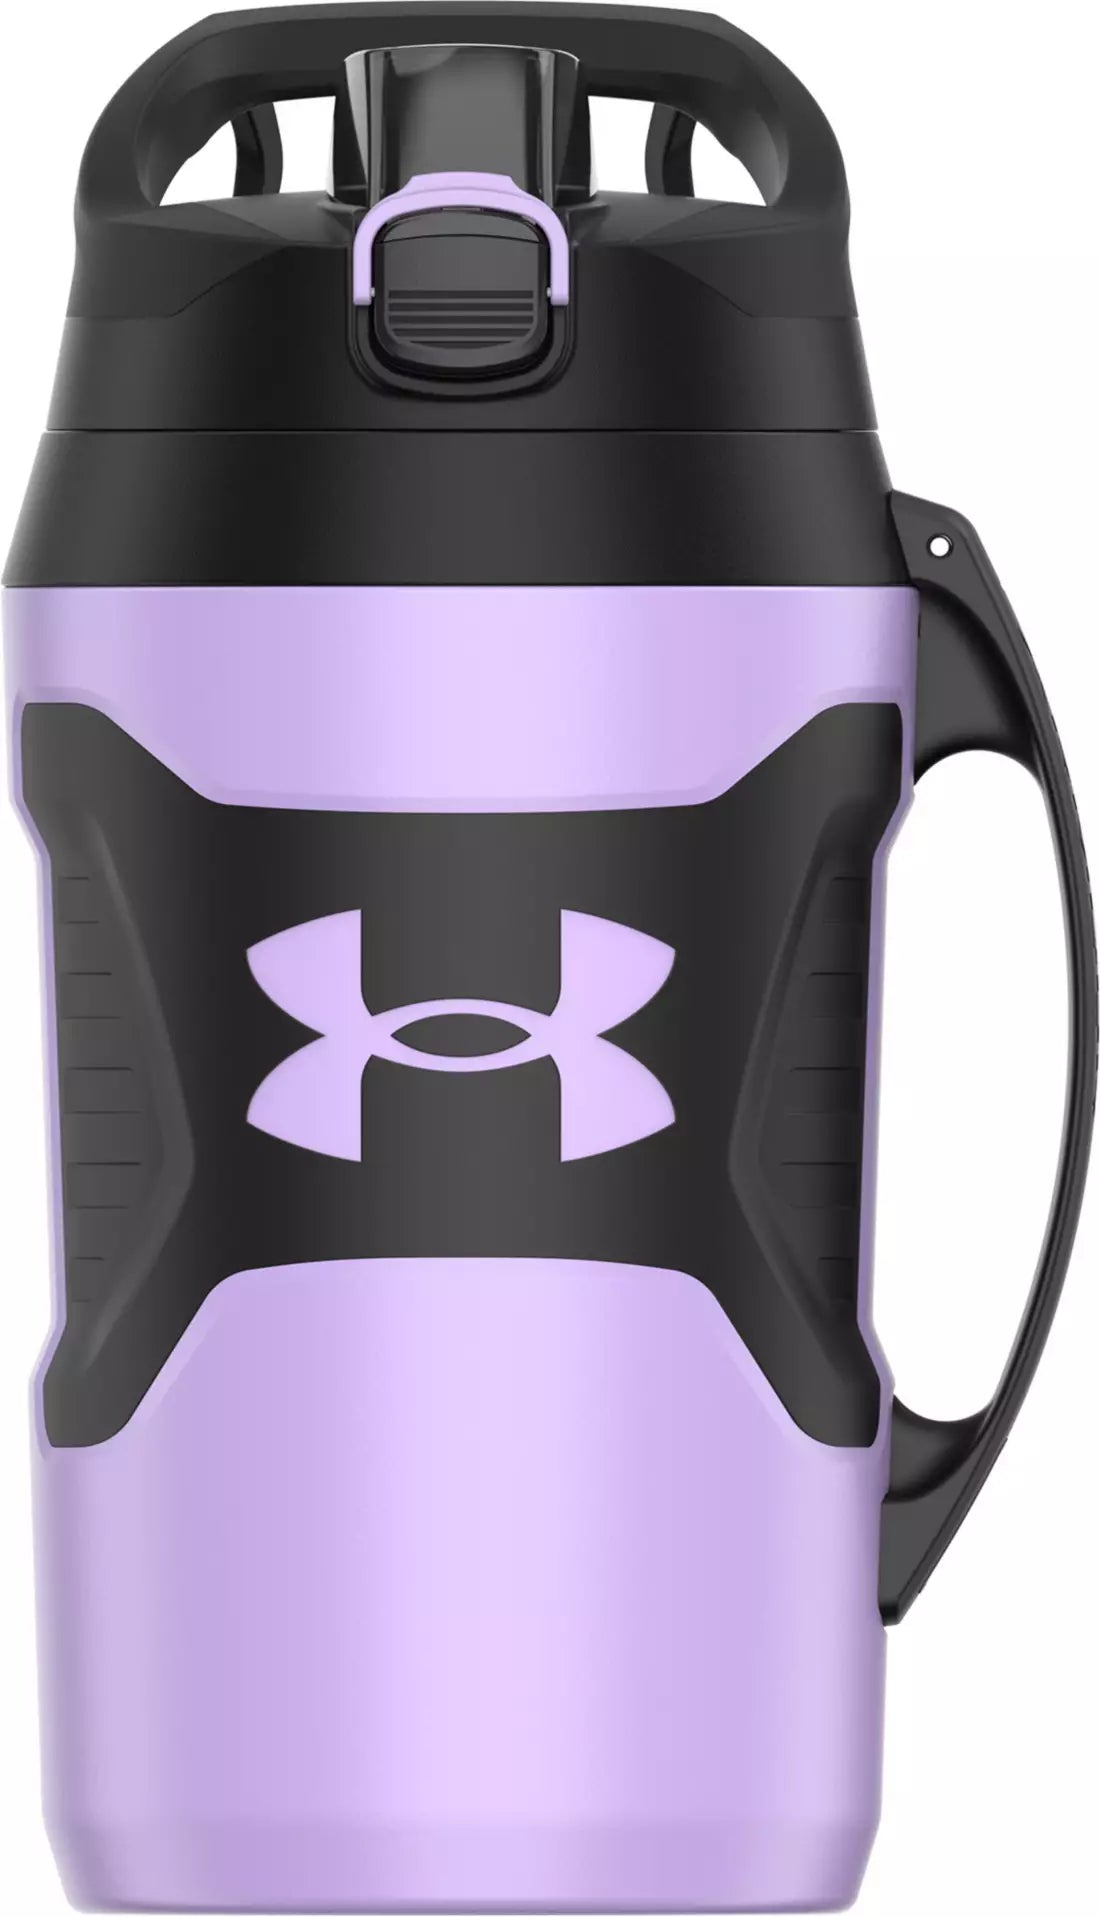 Under Armour 64 Oz Sideline Foam Insulated Bottle, Insulated Bottles